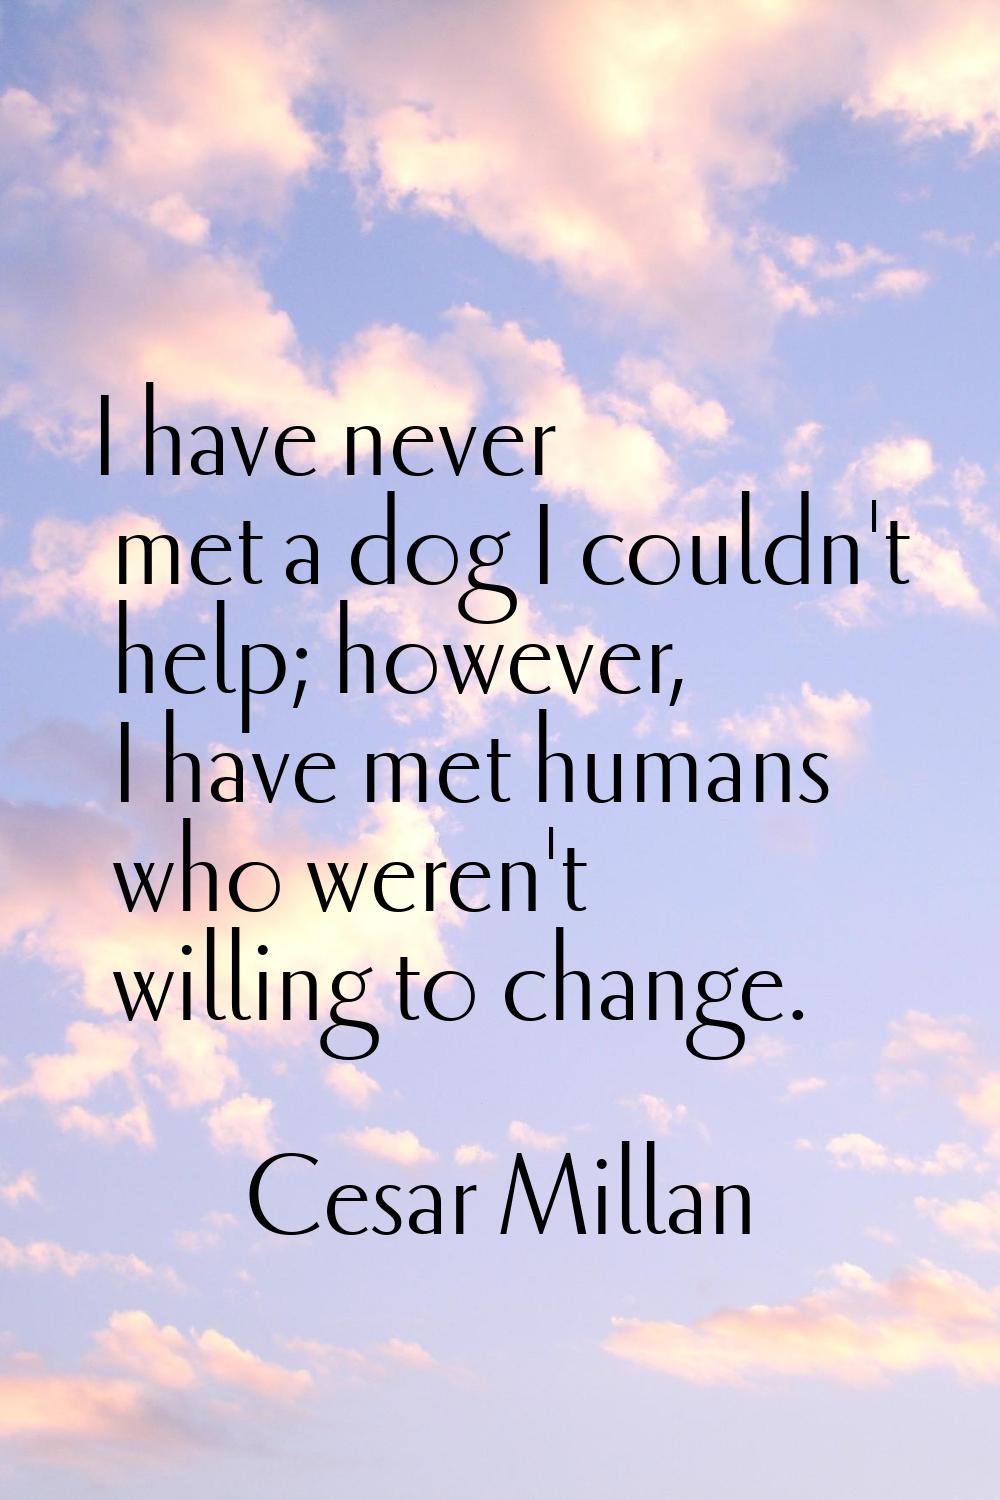 I have never met a dog I couldn't help; however, I have met humans who weren't willing to change.